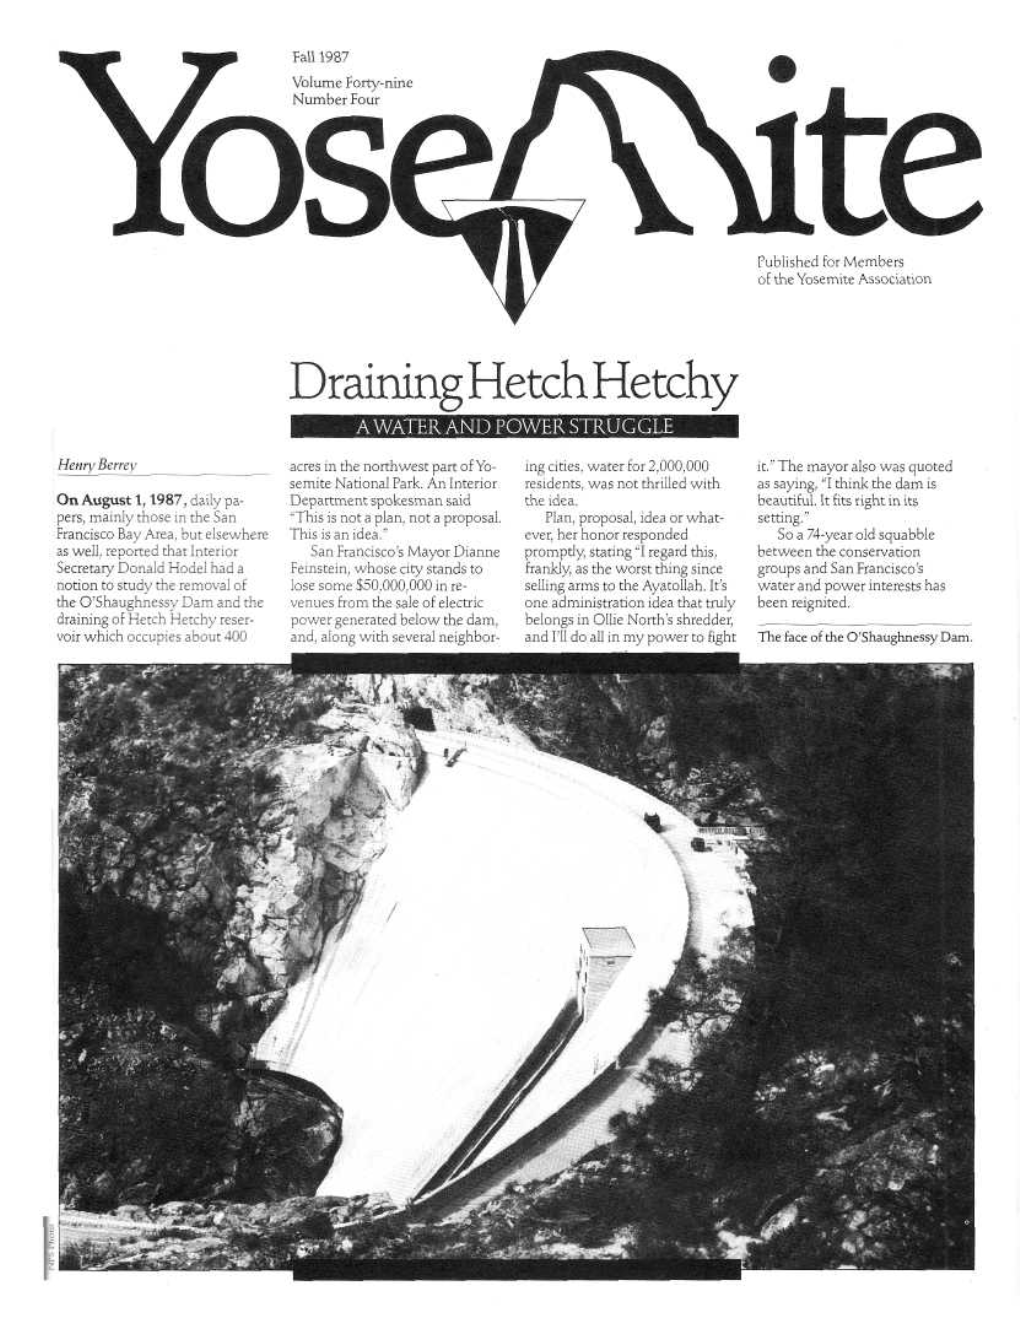 Draining Hetch Hetchy a WATER and POWER STRUGGLE